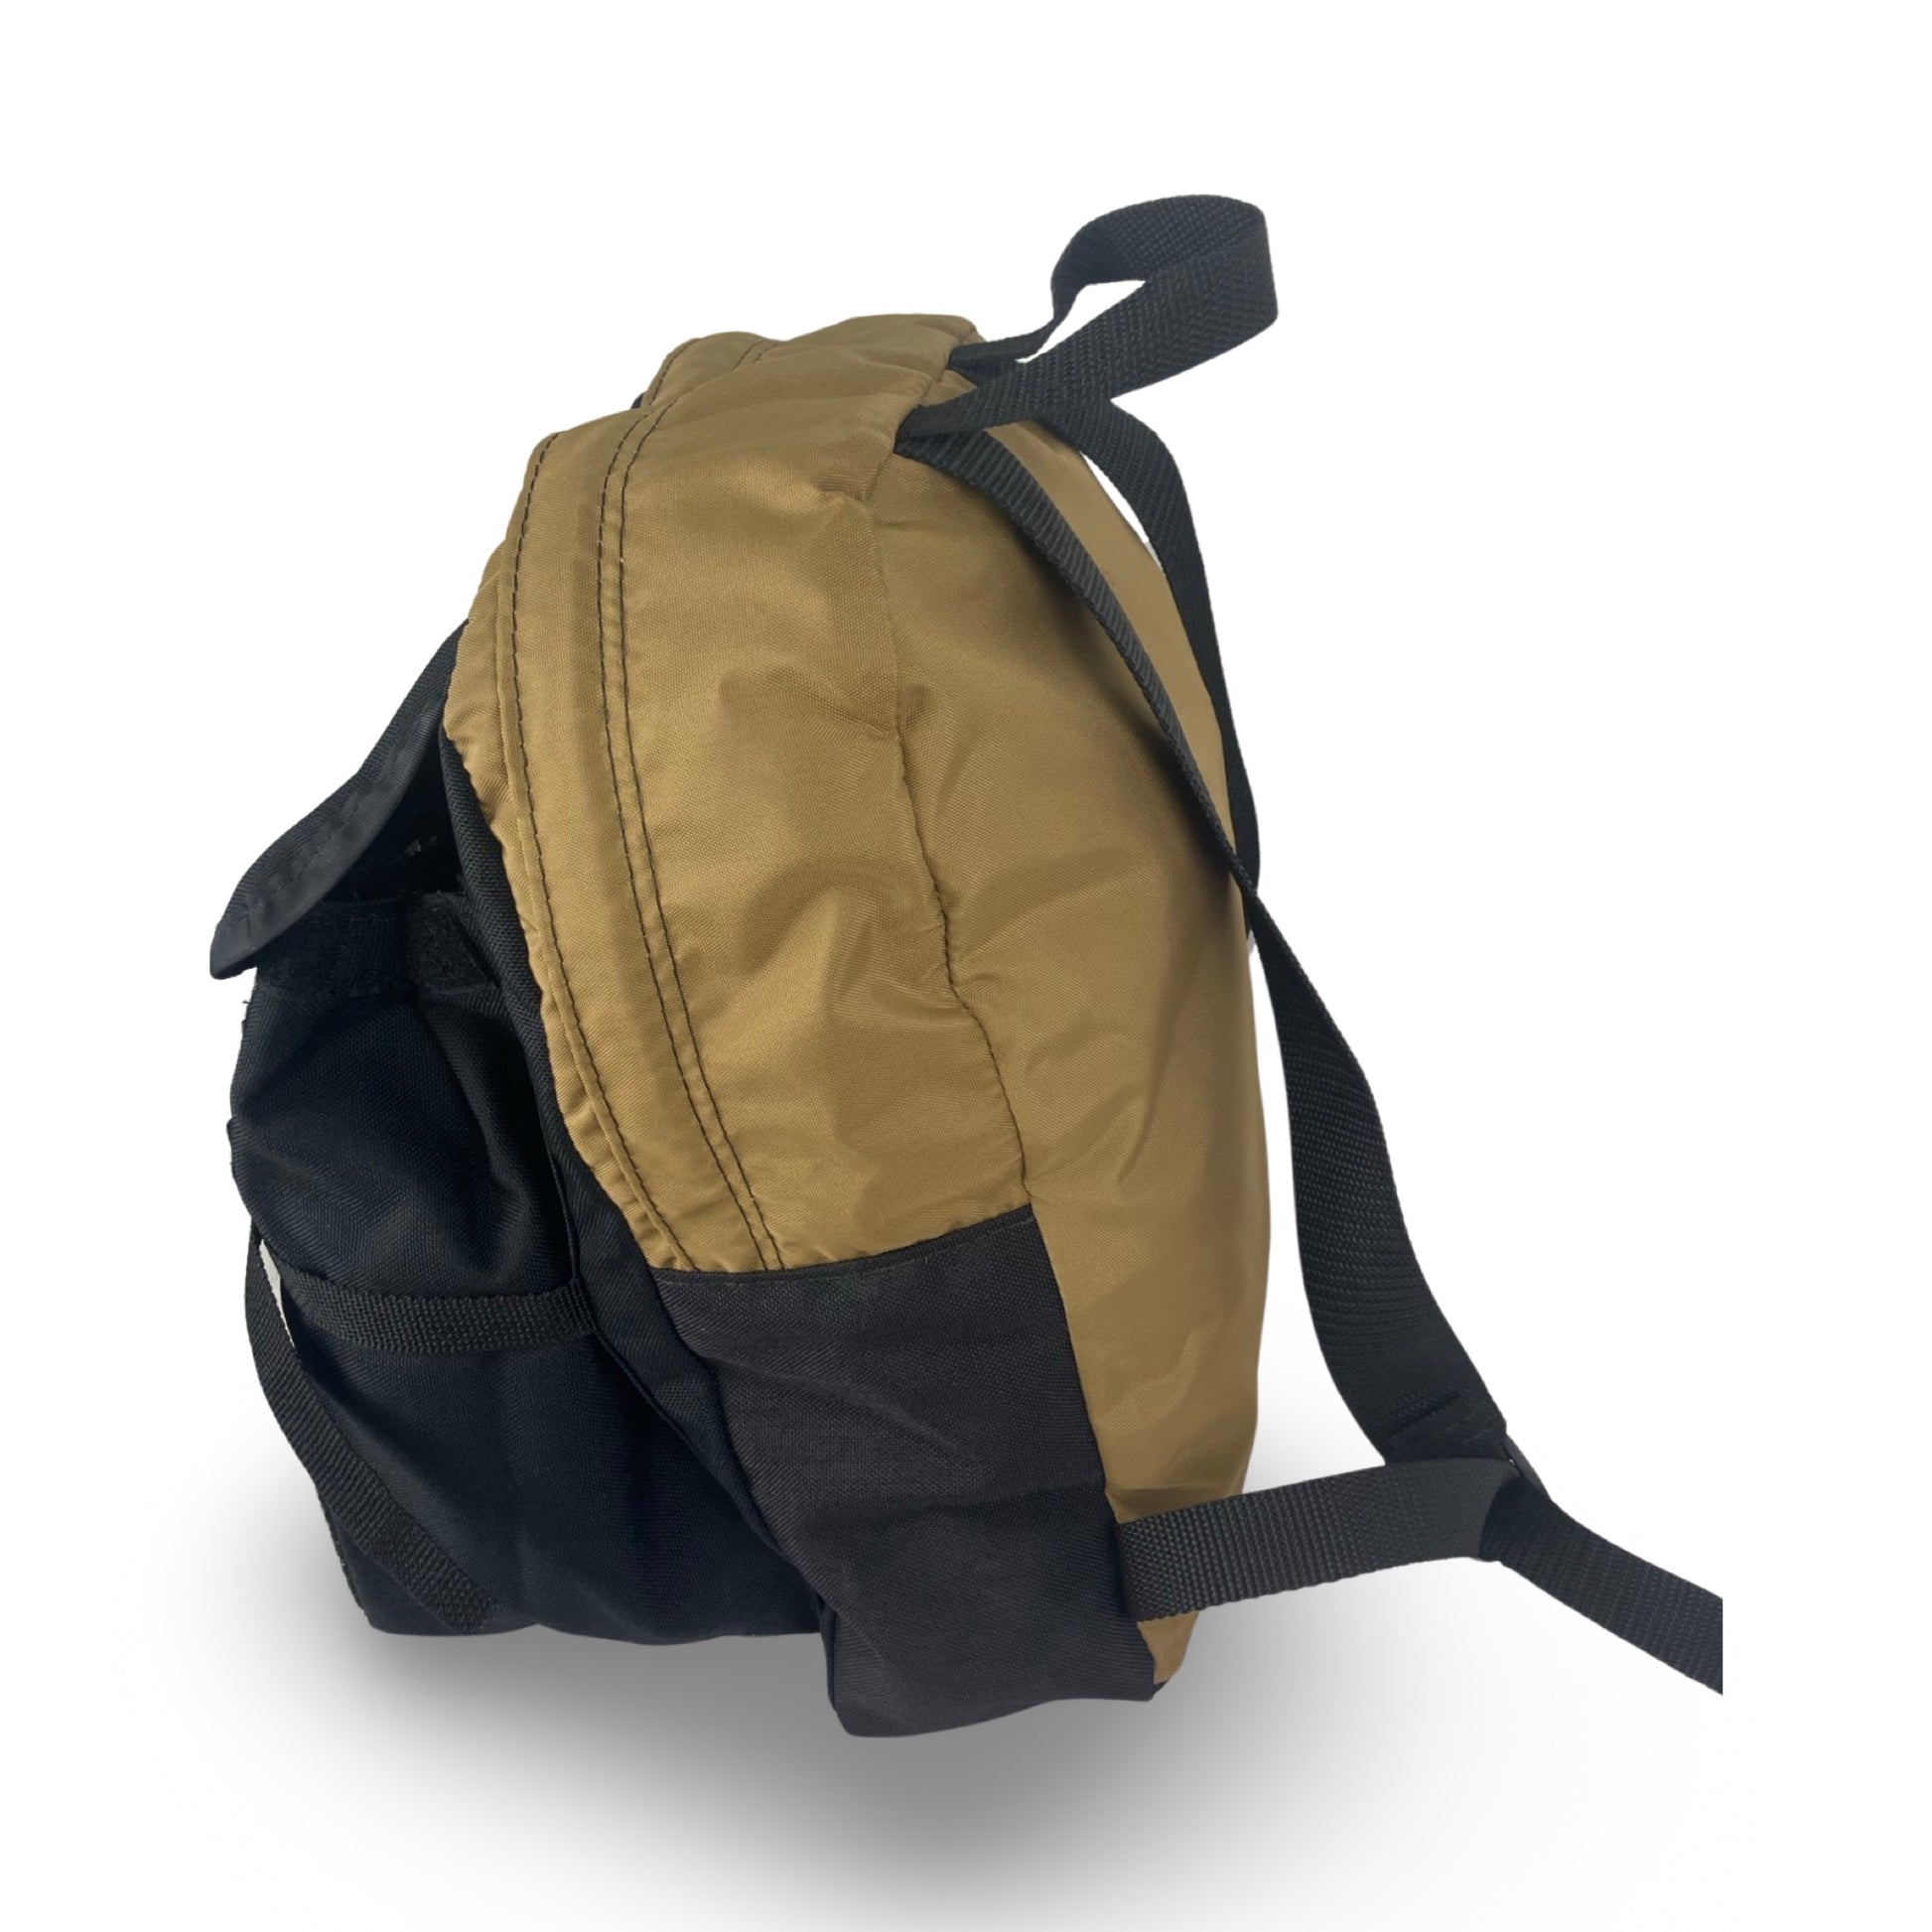 PIPER PACK Children's Backpacks, by Tough Traveler. Made in USA since 1970